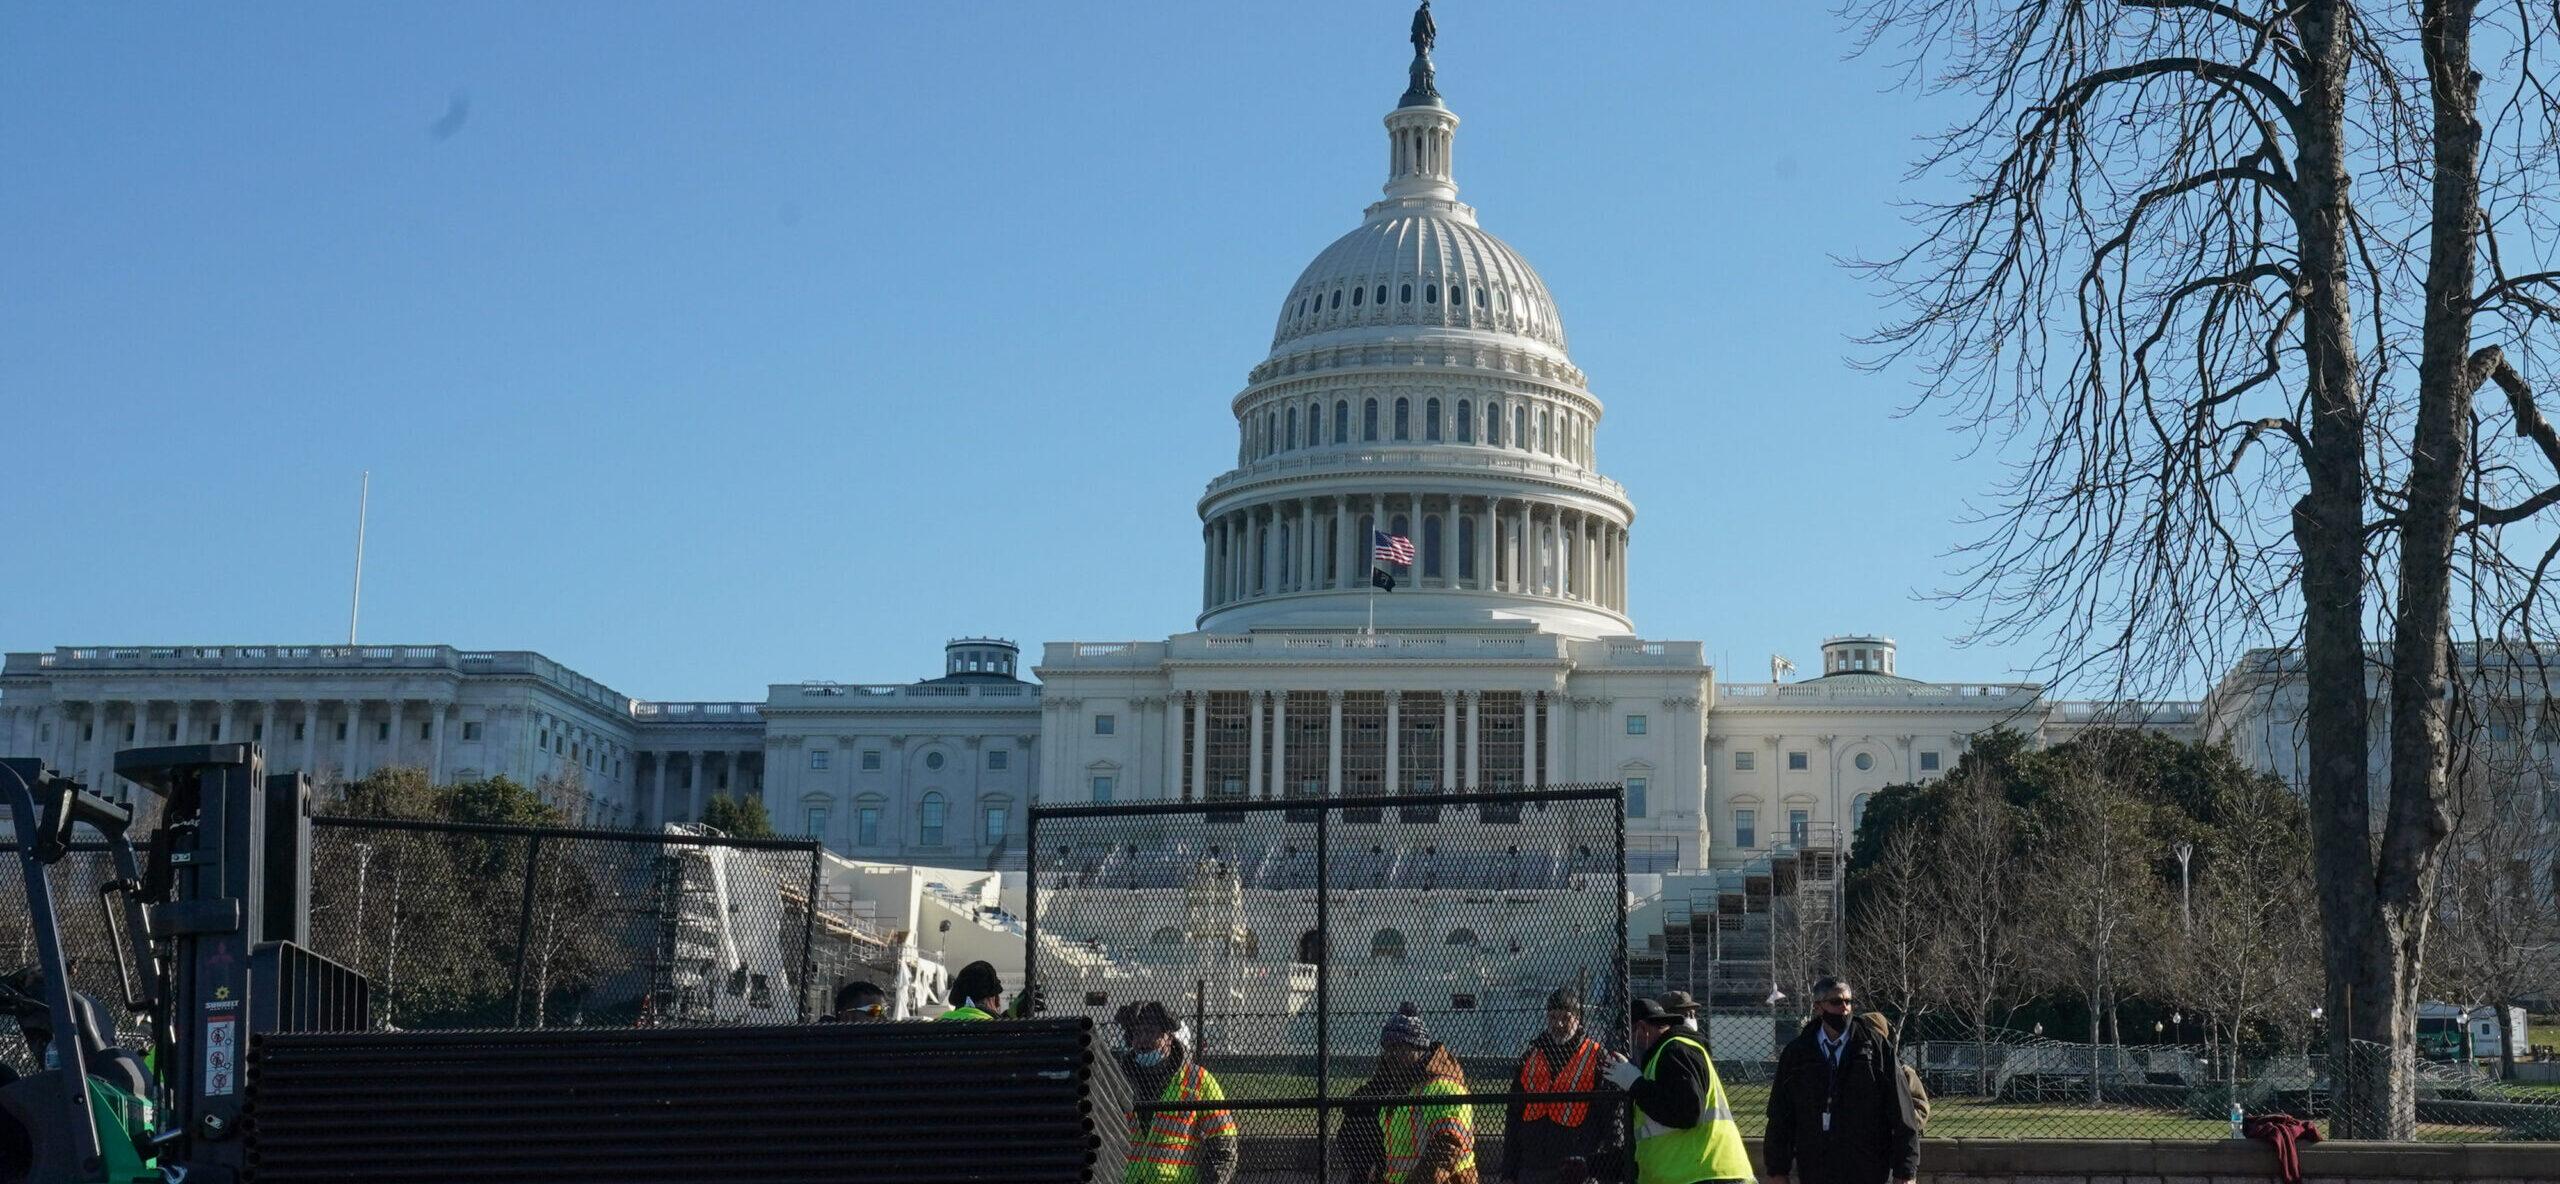 Man Arrested Outside Of U.S. Capitol With AR-15 Assault Rifle